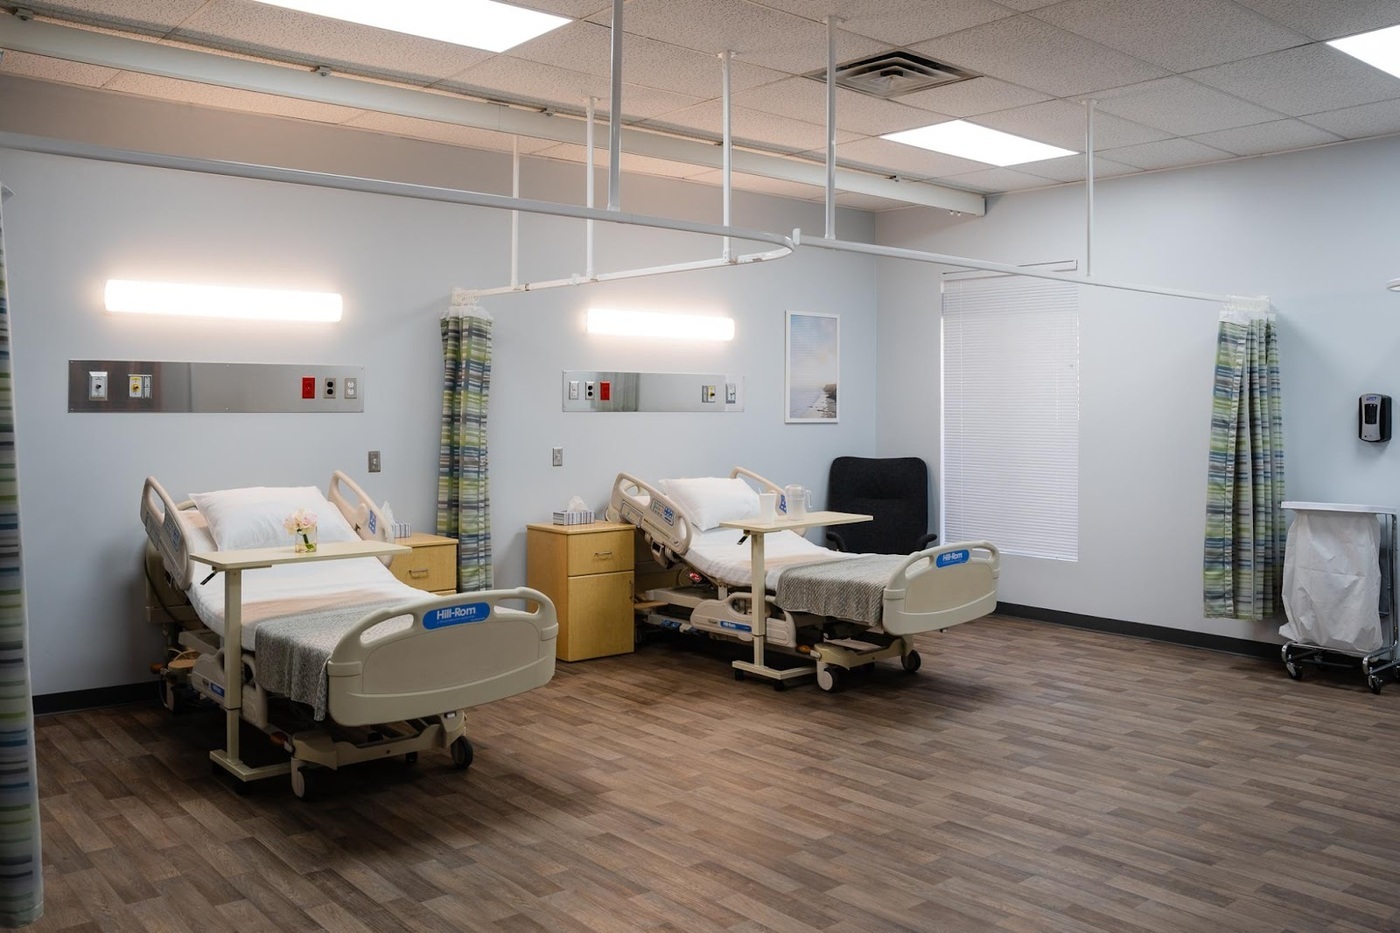 Lorton Group produces high-quality privacy curtains for the medical industry.